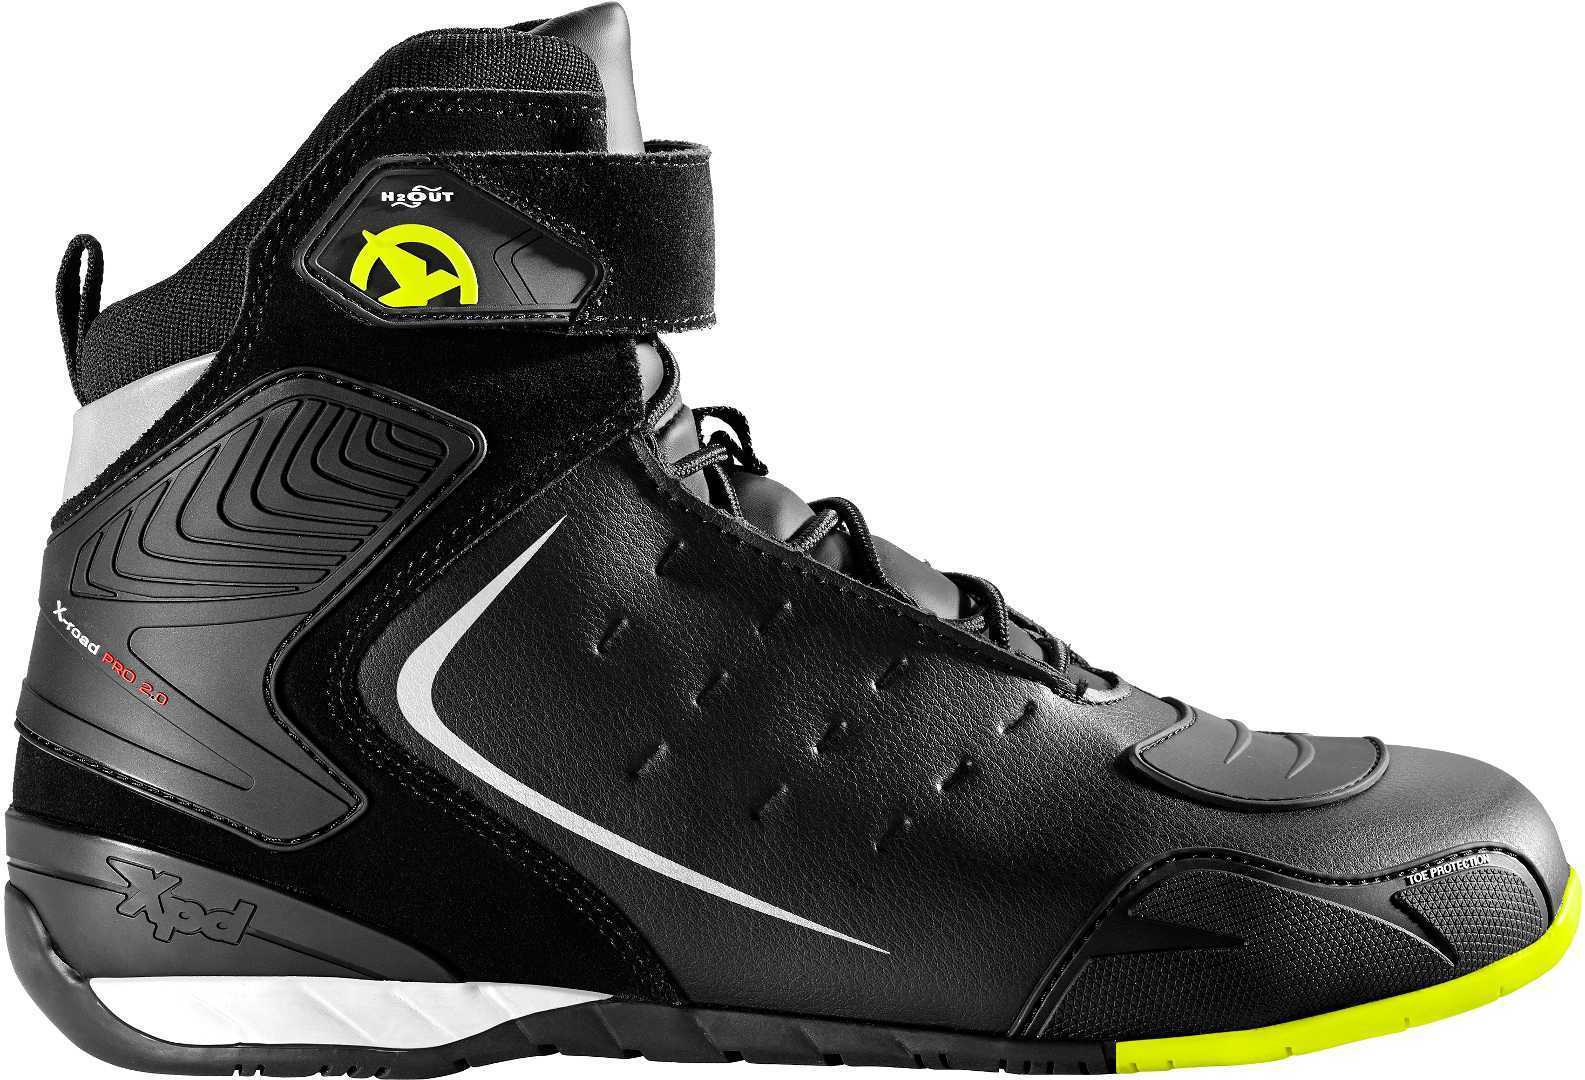 Image of XPD X-Road H2Out Yellow Fluo Talla 39